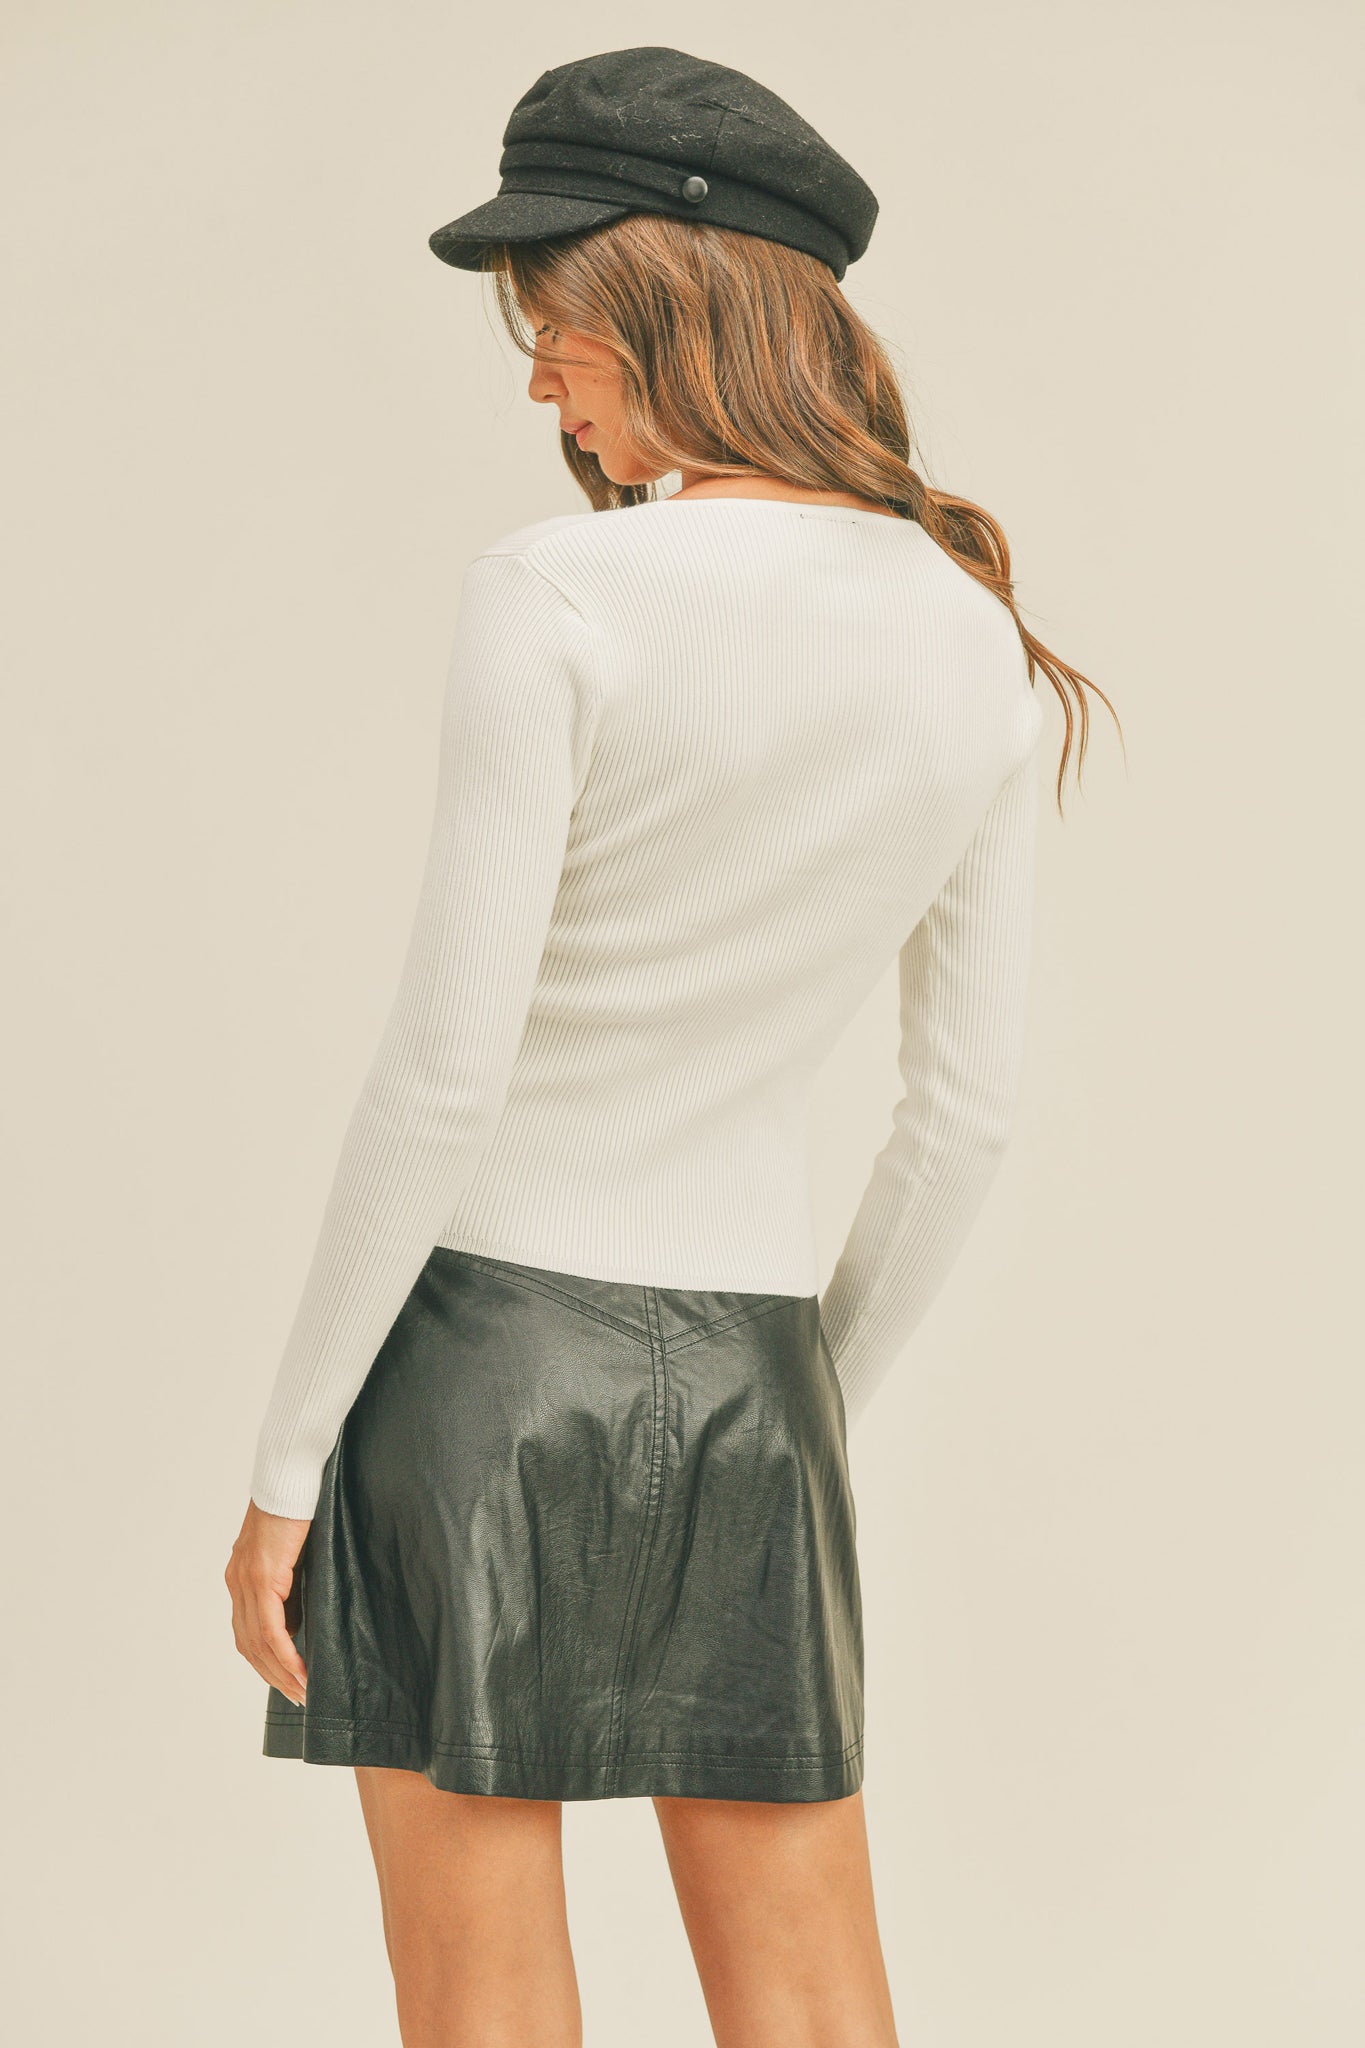 View 5 of Kala Long Sleeve Top, a Tops from Larrea Cove. Detail: .